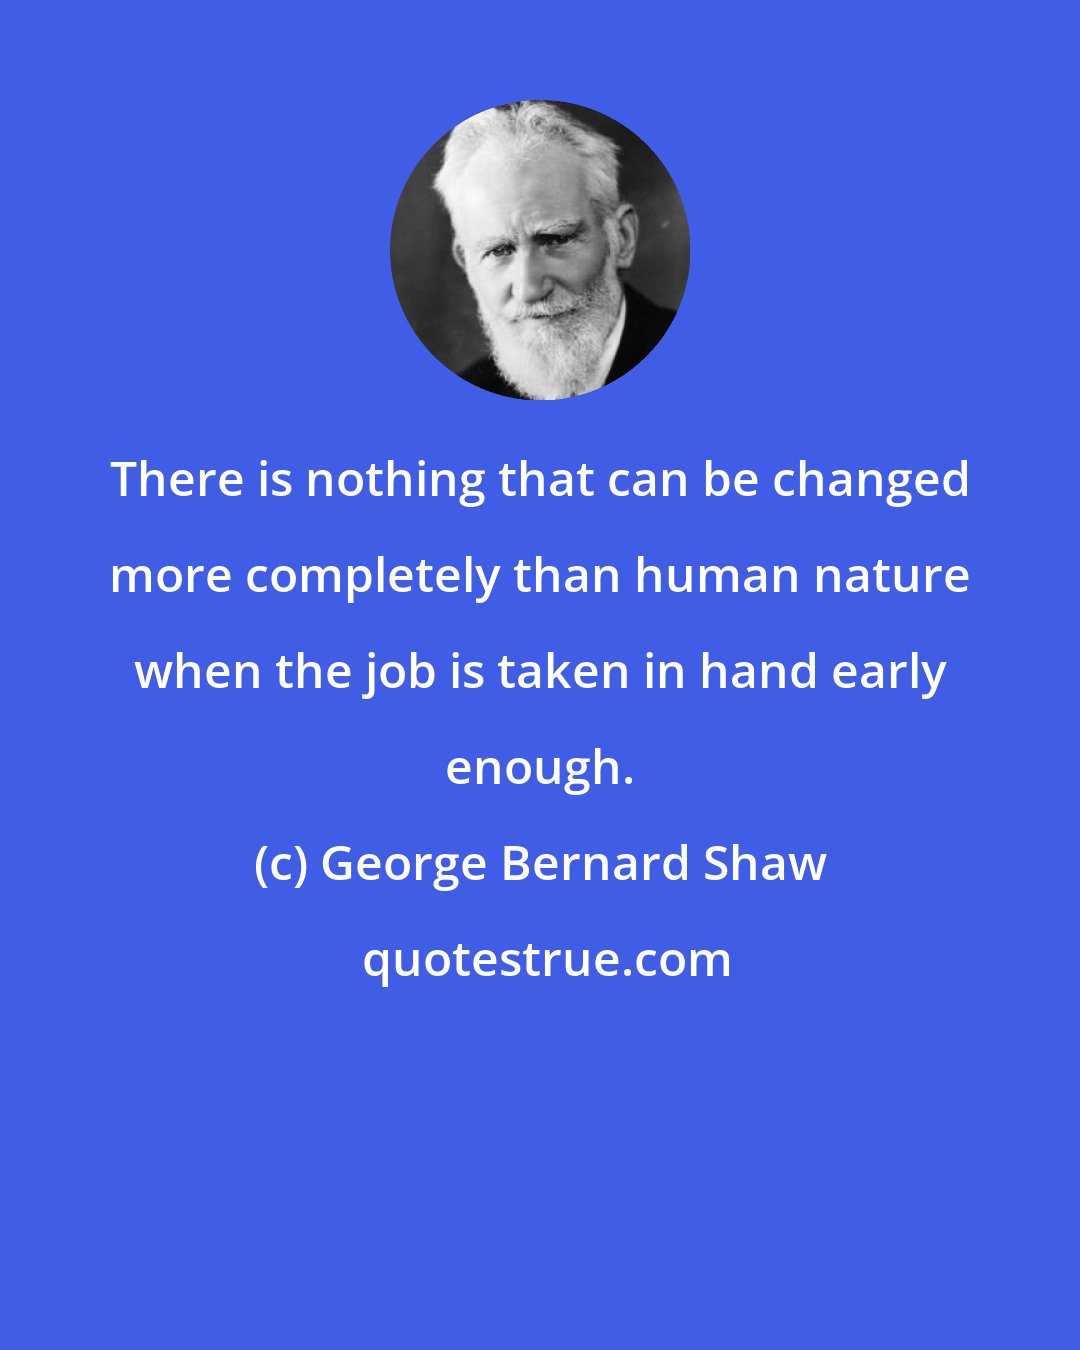 George Bernard Shaw: There is nothing that can be changed more completely than human nature when the job is taken in hand early enough.